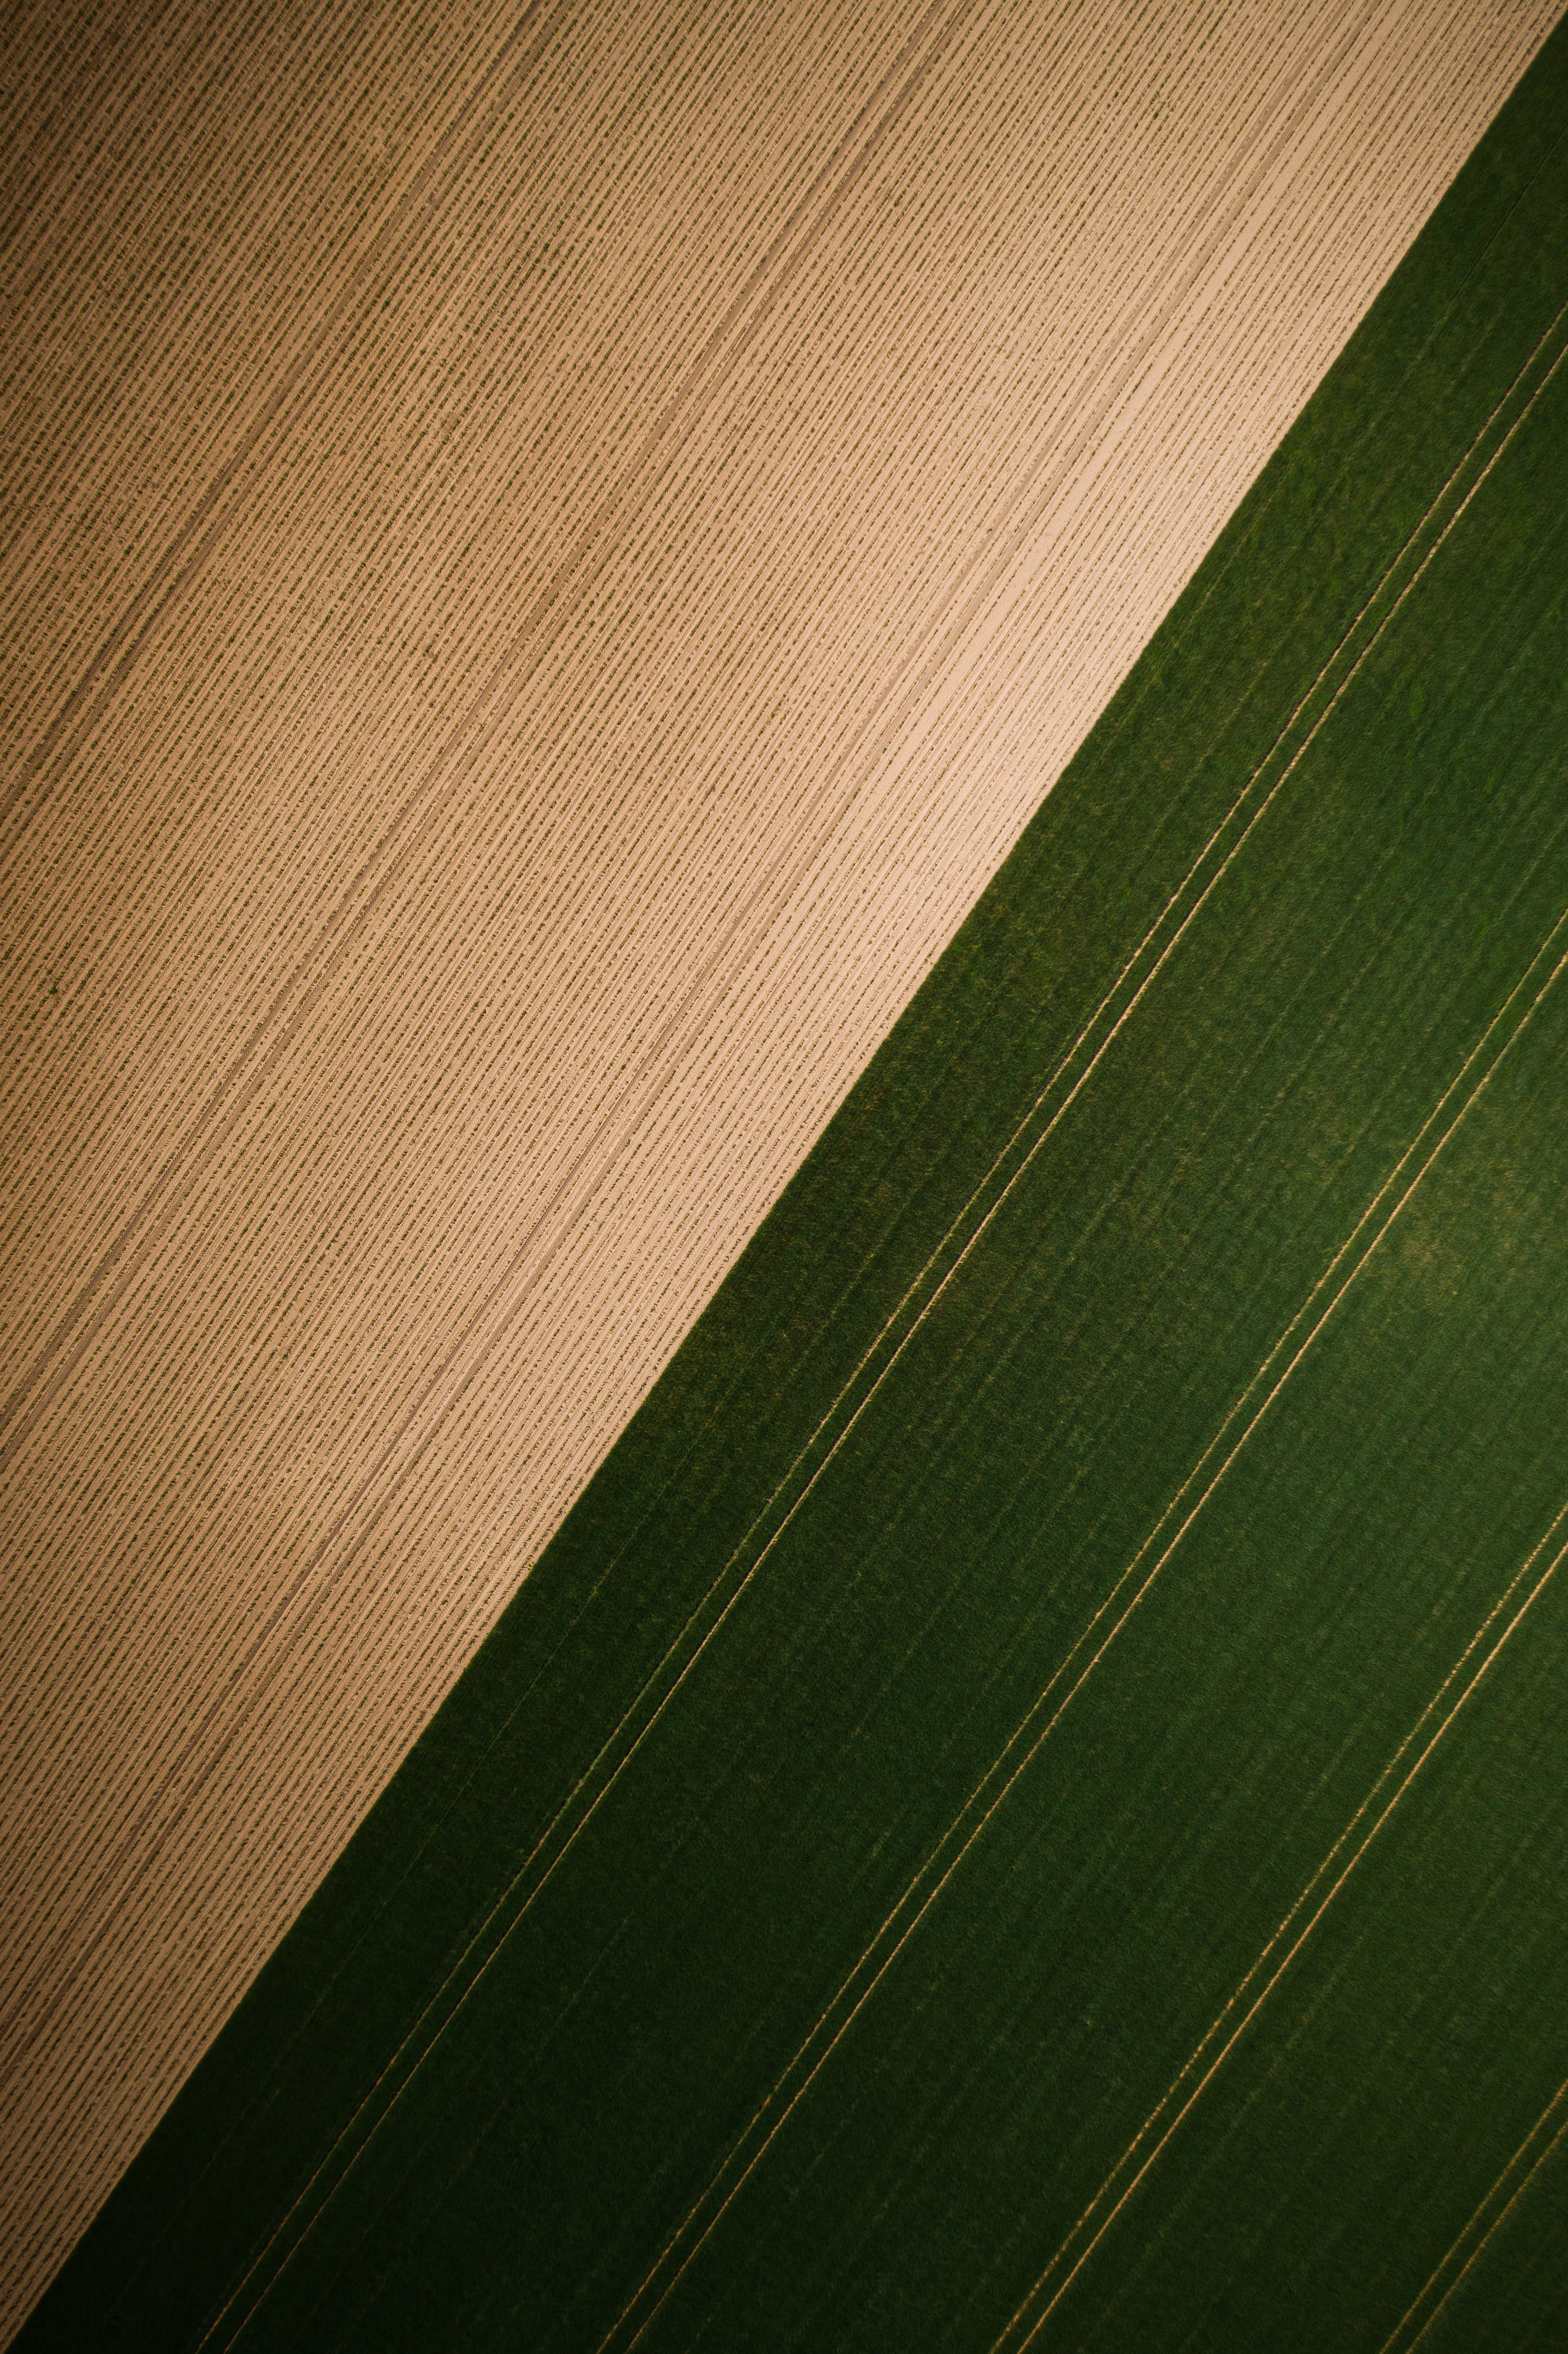 stripes, grass, view from above, texture, textures, field, streaks Free Stock Photo